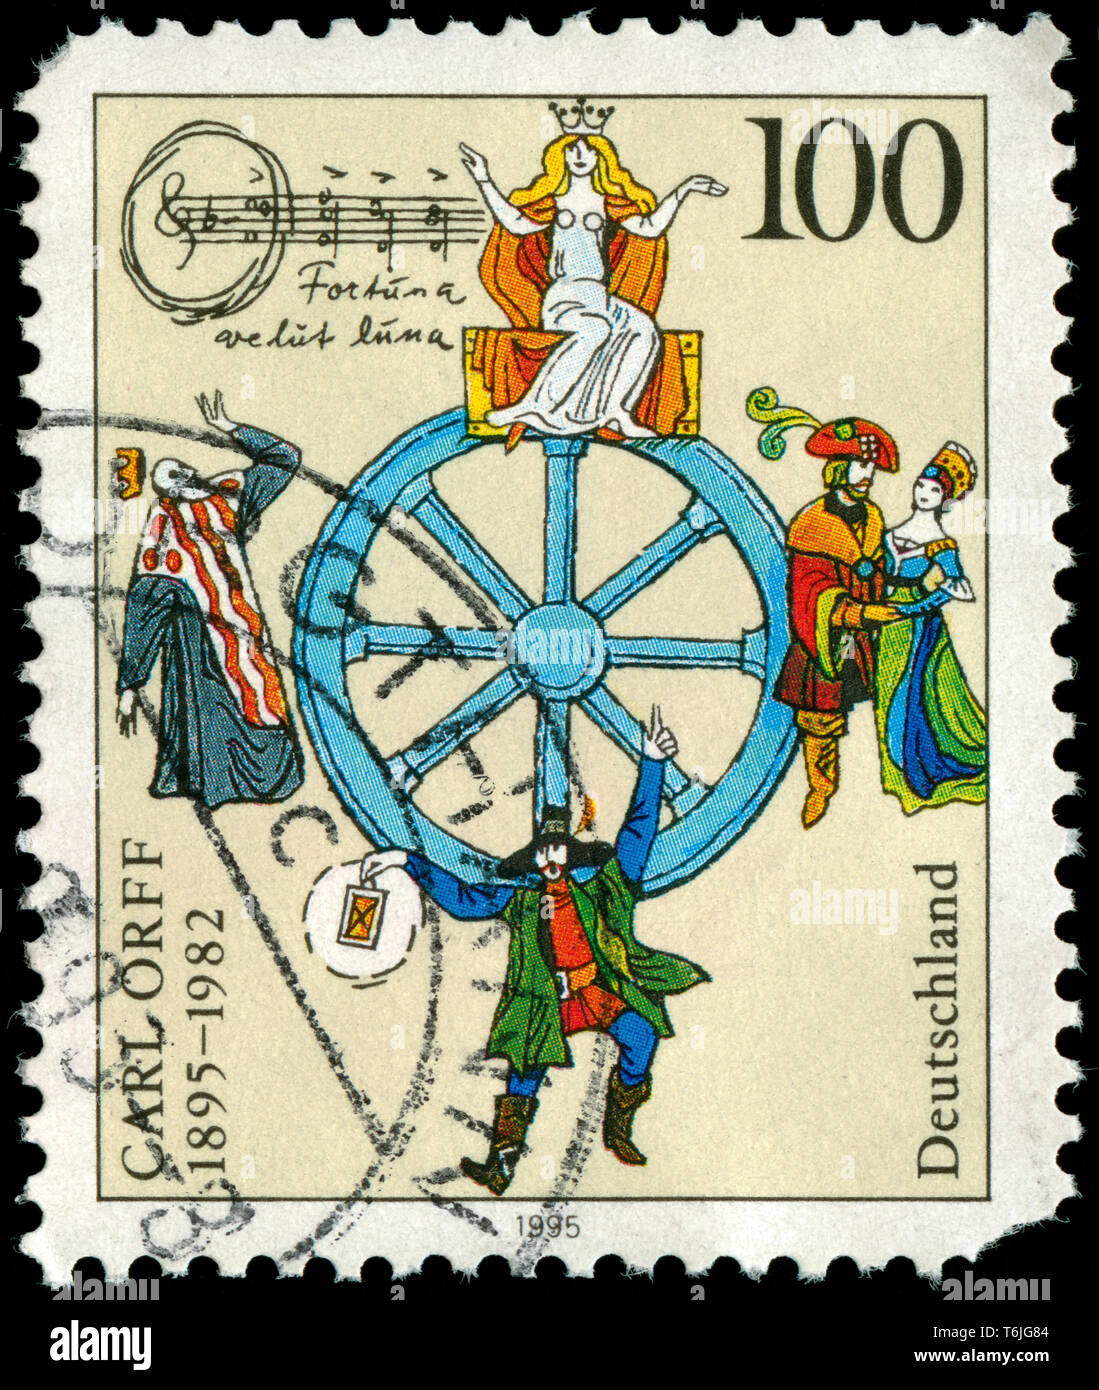 Postage stamp from the Federal Republic of Germany in the Birth Centenary of Carl Orff series issued in 1995 Stock Photo